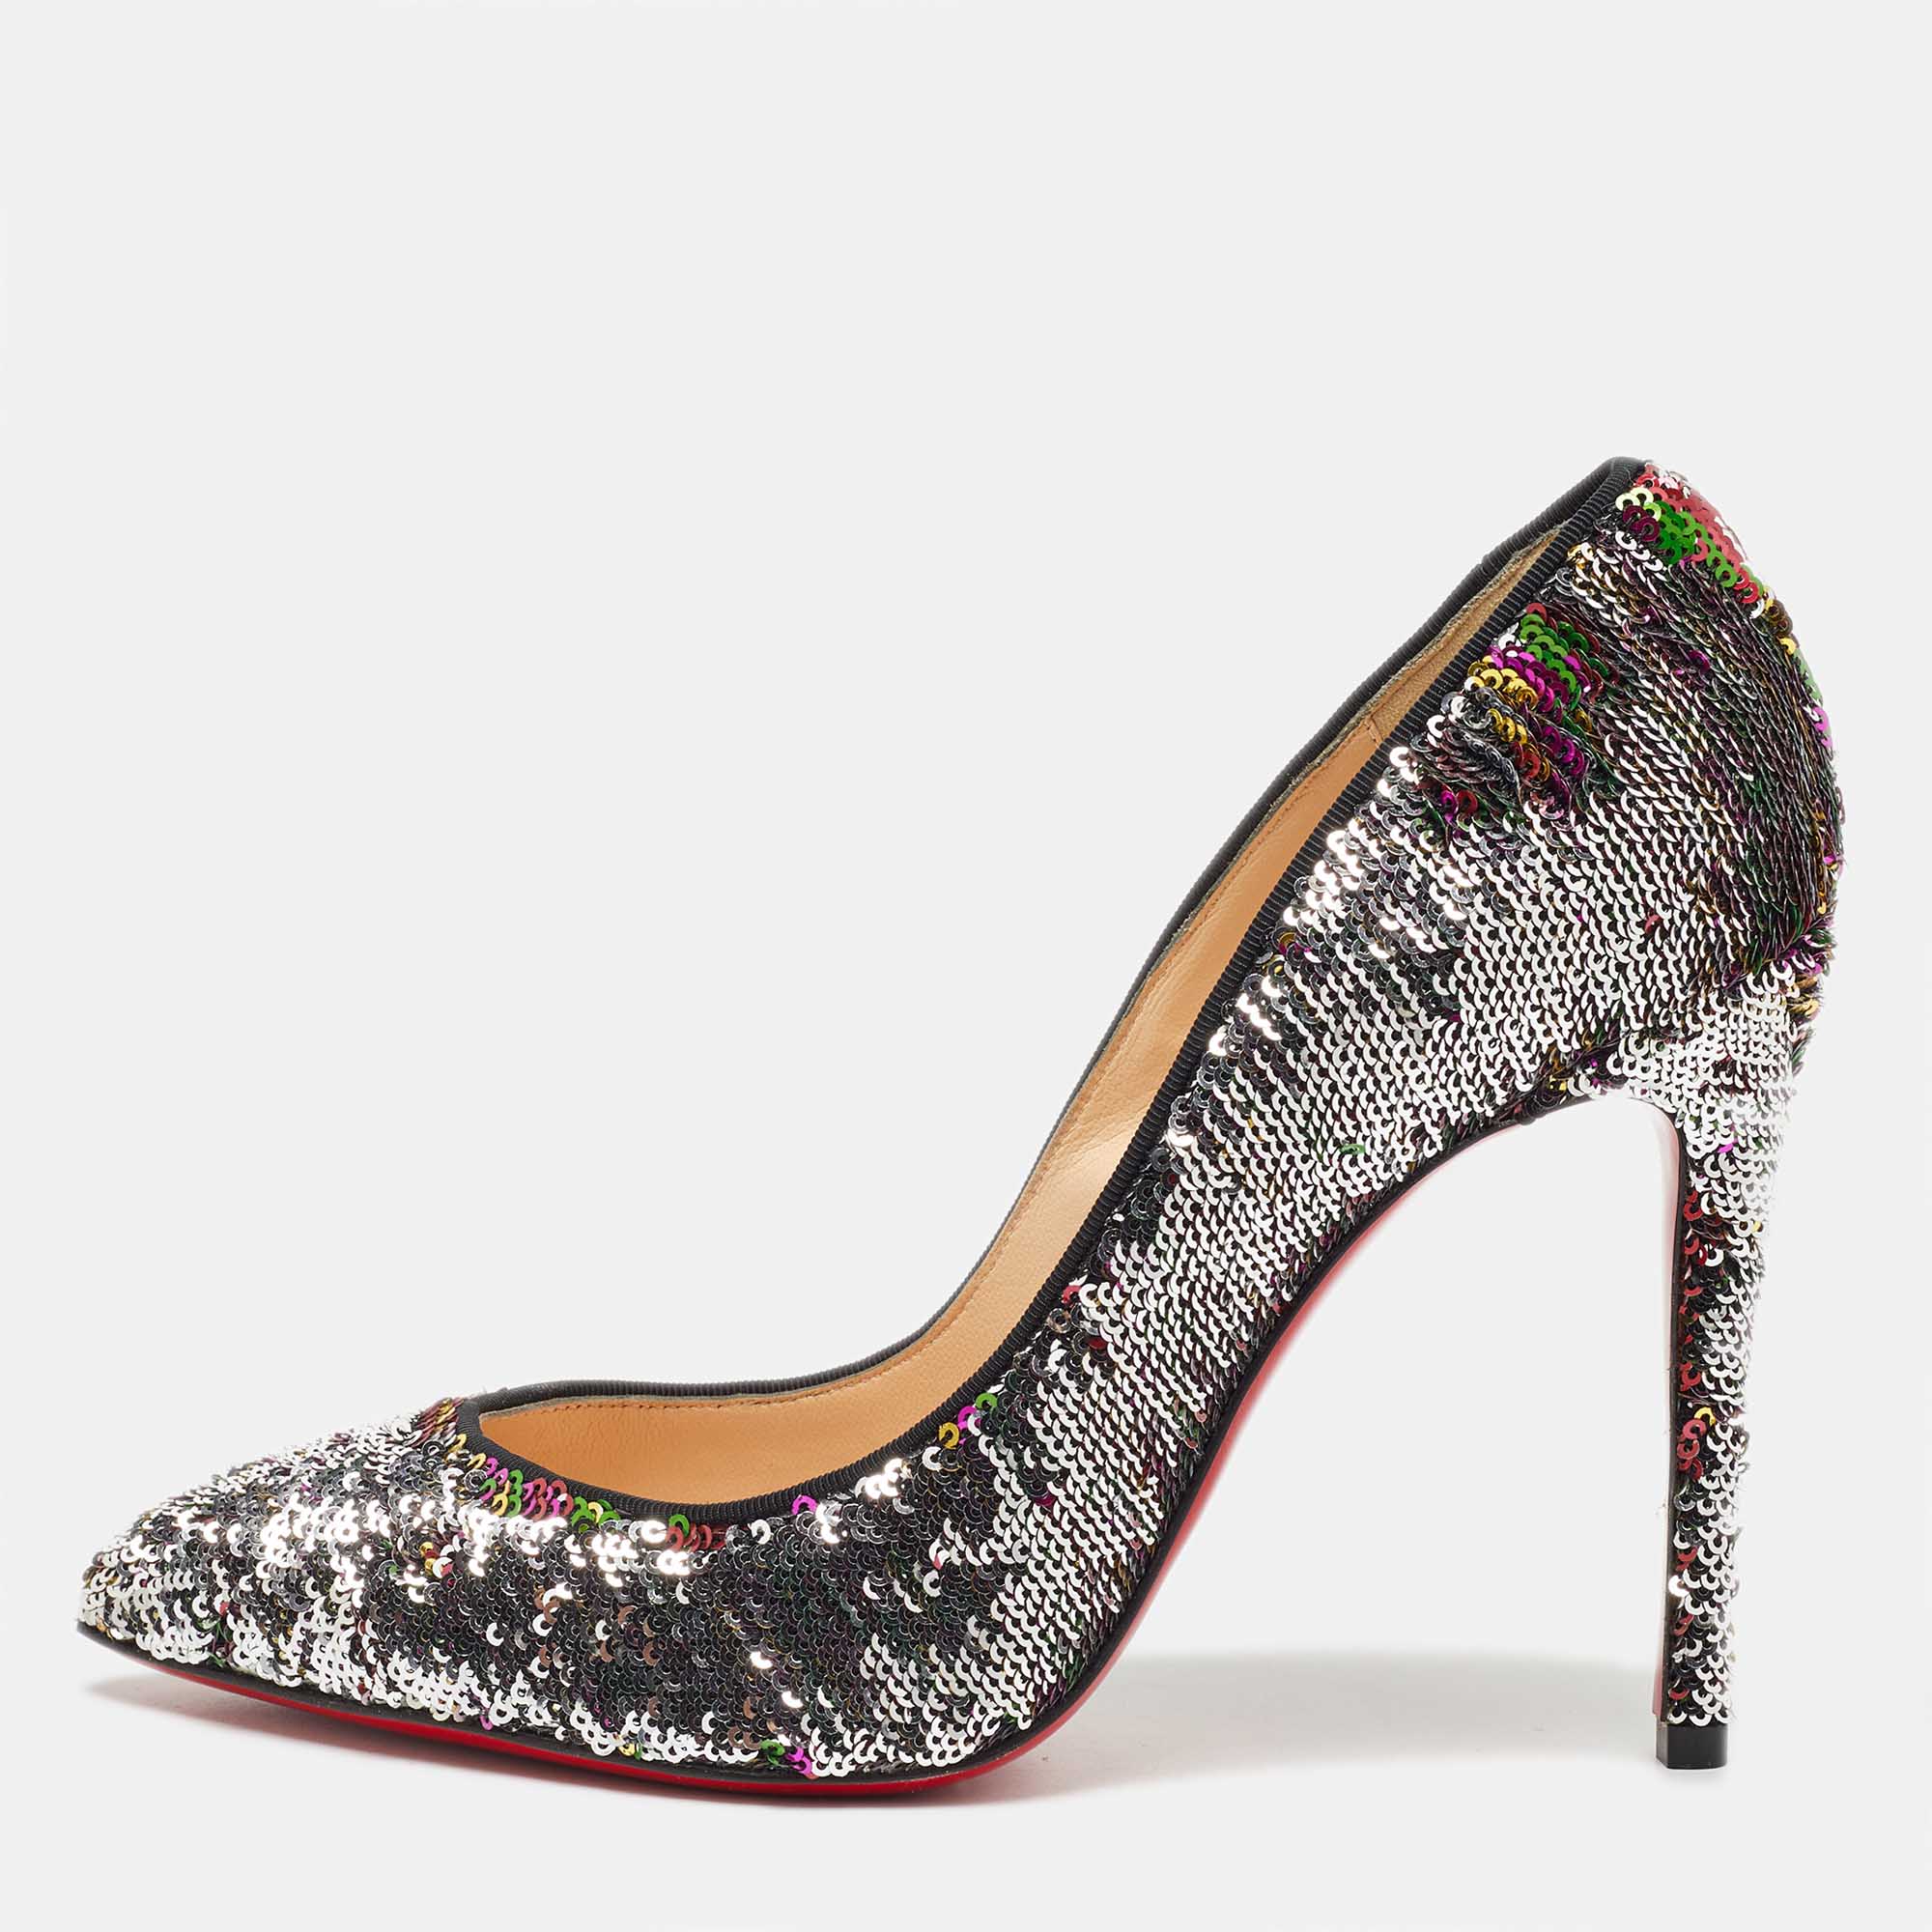 Pre-owned Christian Louboutin Multicolor Sequins Pigalle Follies Pointed Toe Pumps Size 37.5